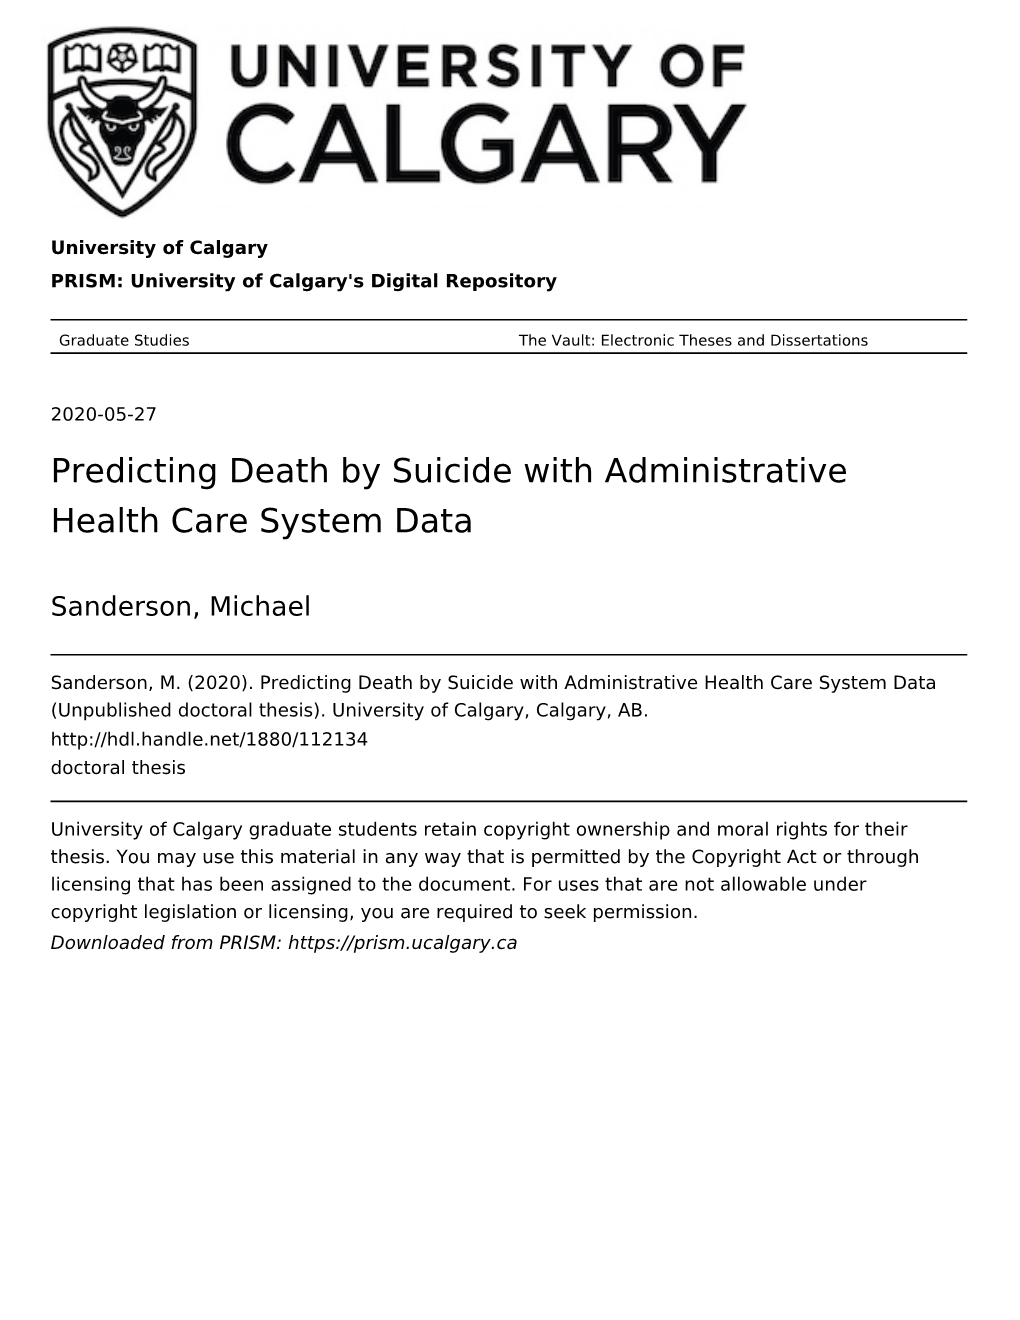 Predicting Death by Suicide with Administrative Health Care System Data